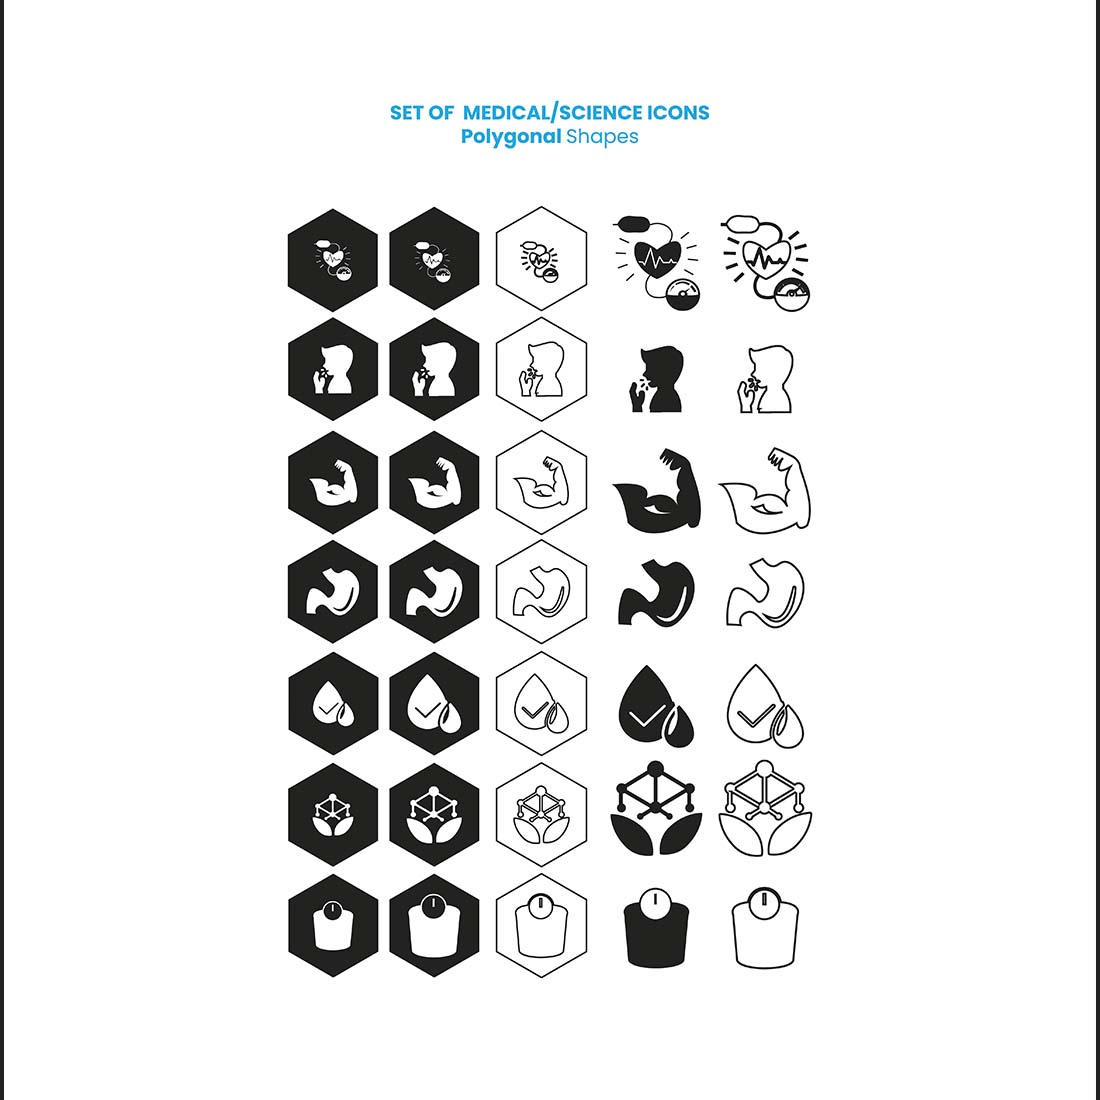 35 Science and Health Icons Bundle, black icons hexagonal shape.